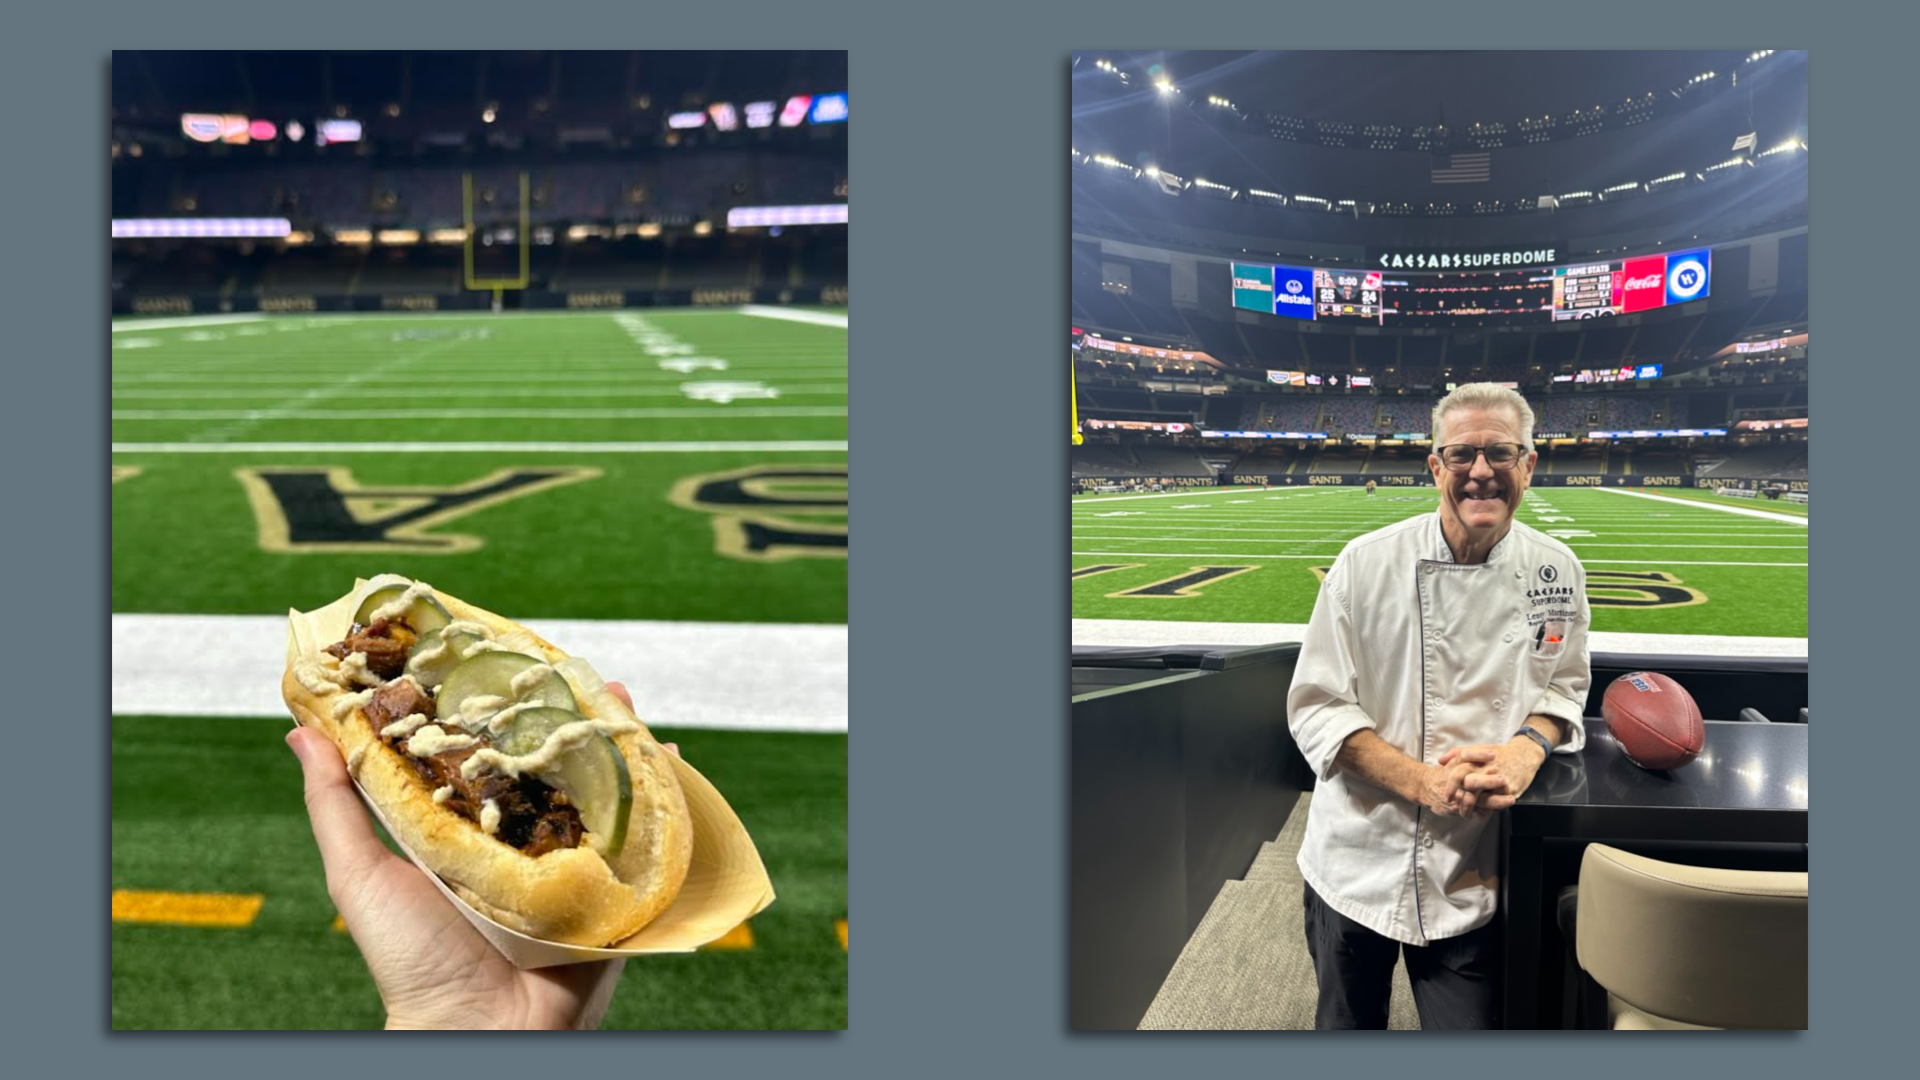 Photos shows food at the Superdome and the executive chef in charge of the program